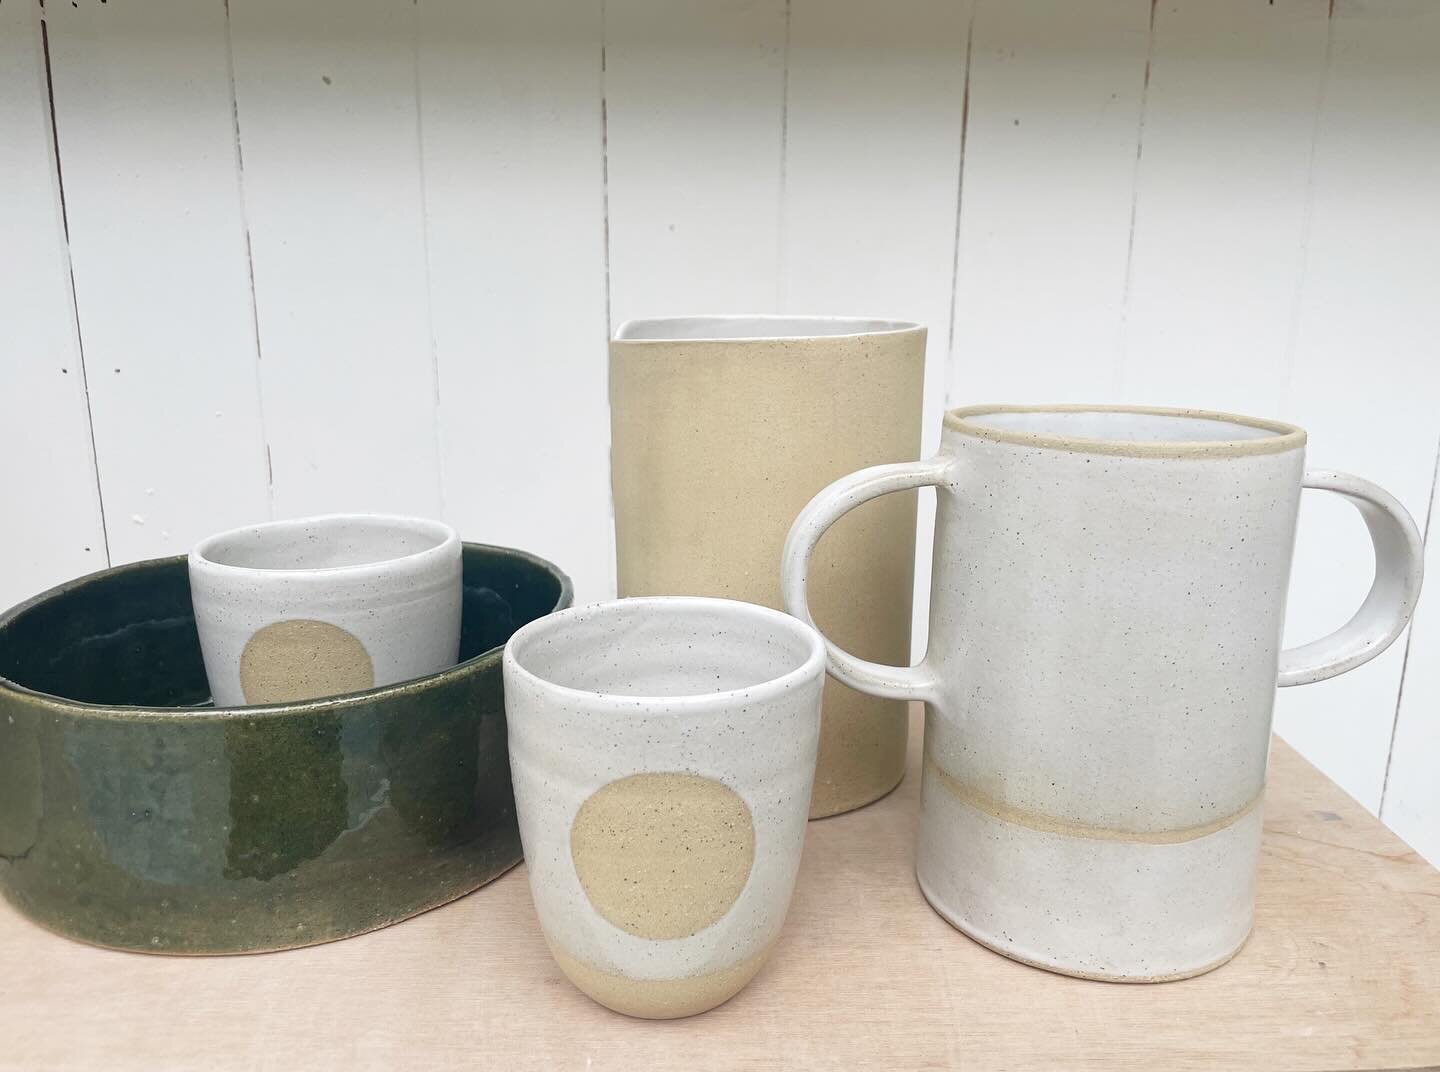 Sharing some photos of the production I made for our last pop up with @claynorthernrivers in Bangalow last December. 
I can&rsquo;t wait for the next one . 
Some pieces will be soon available on my website.